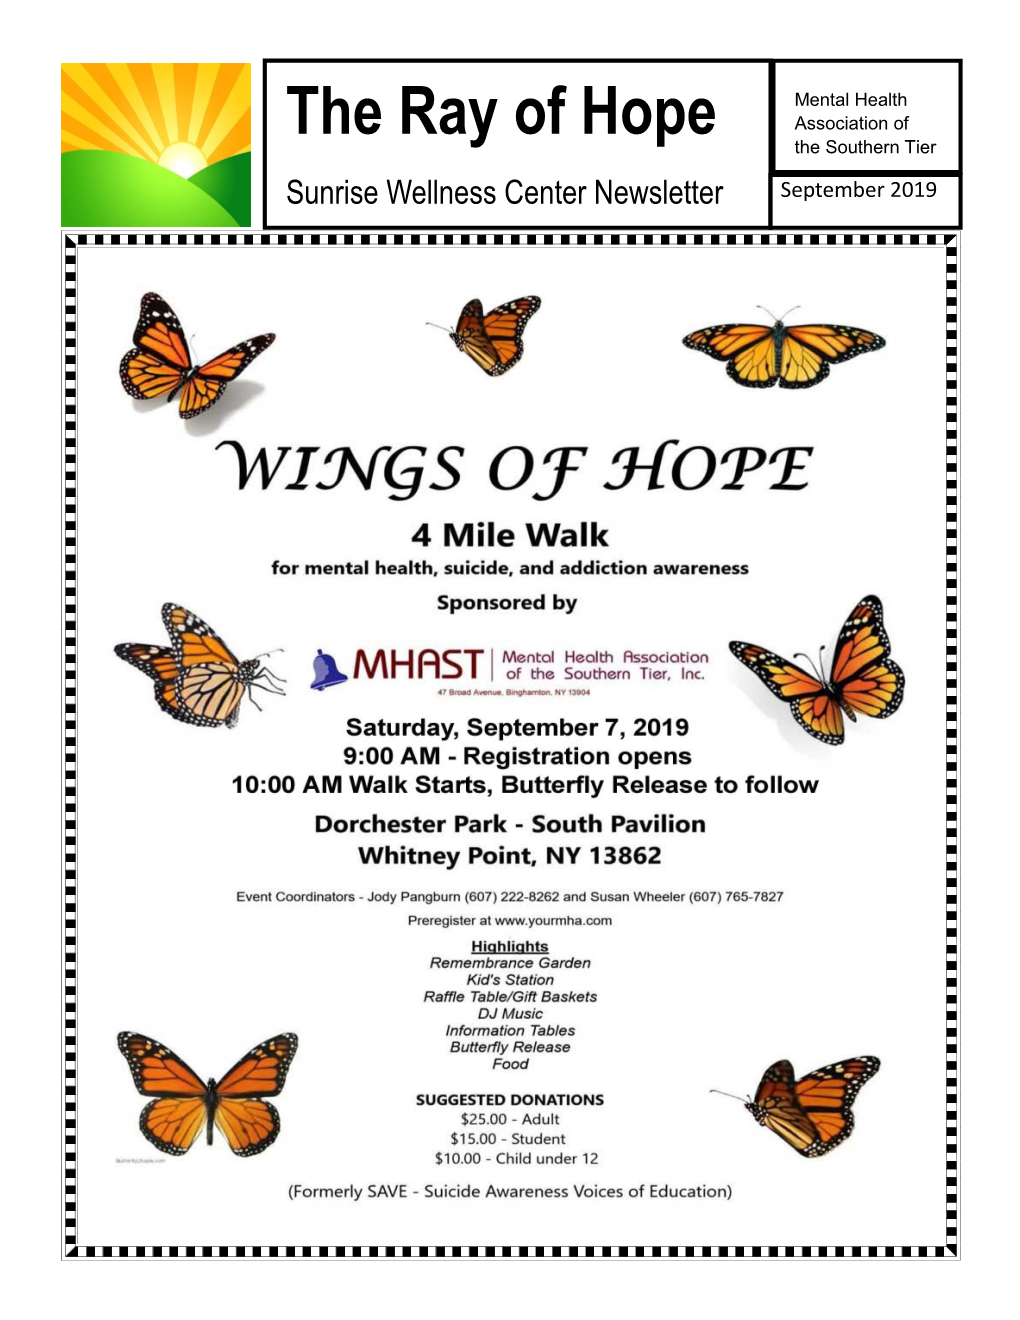 The Ray of Hope Association of the Southern Tier Sunrise Wellness Center Newsletter September 2019